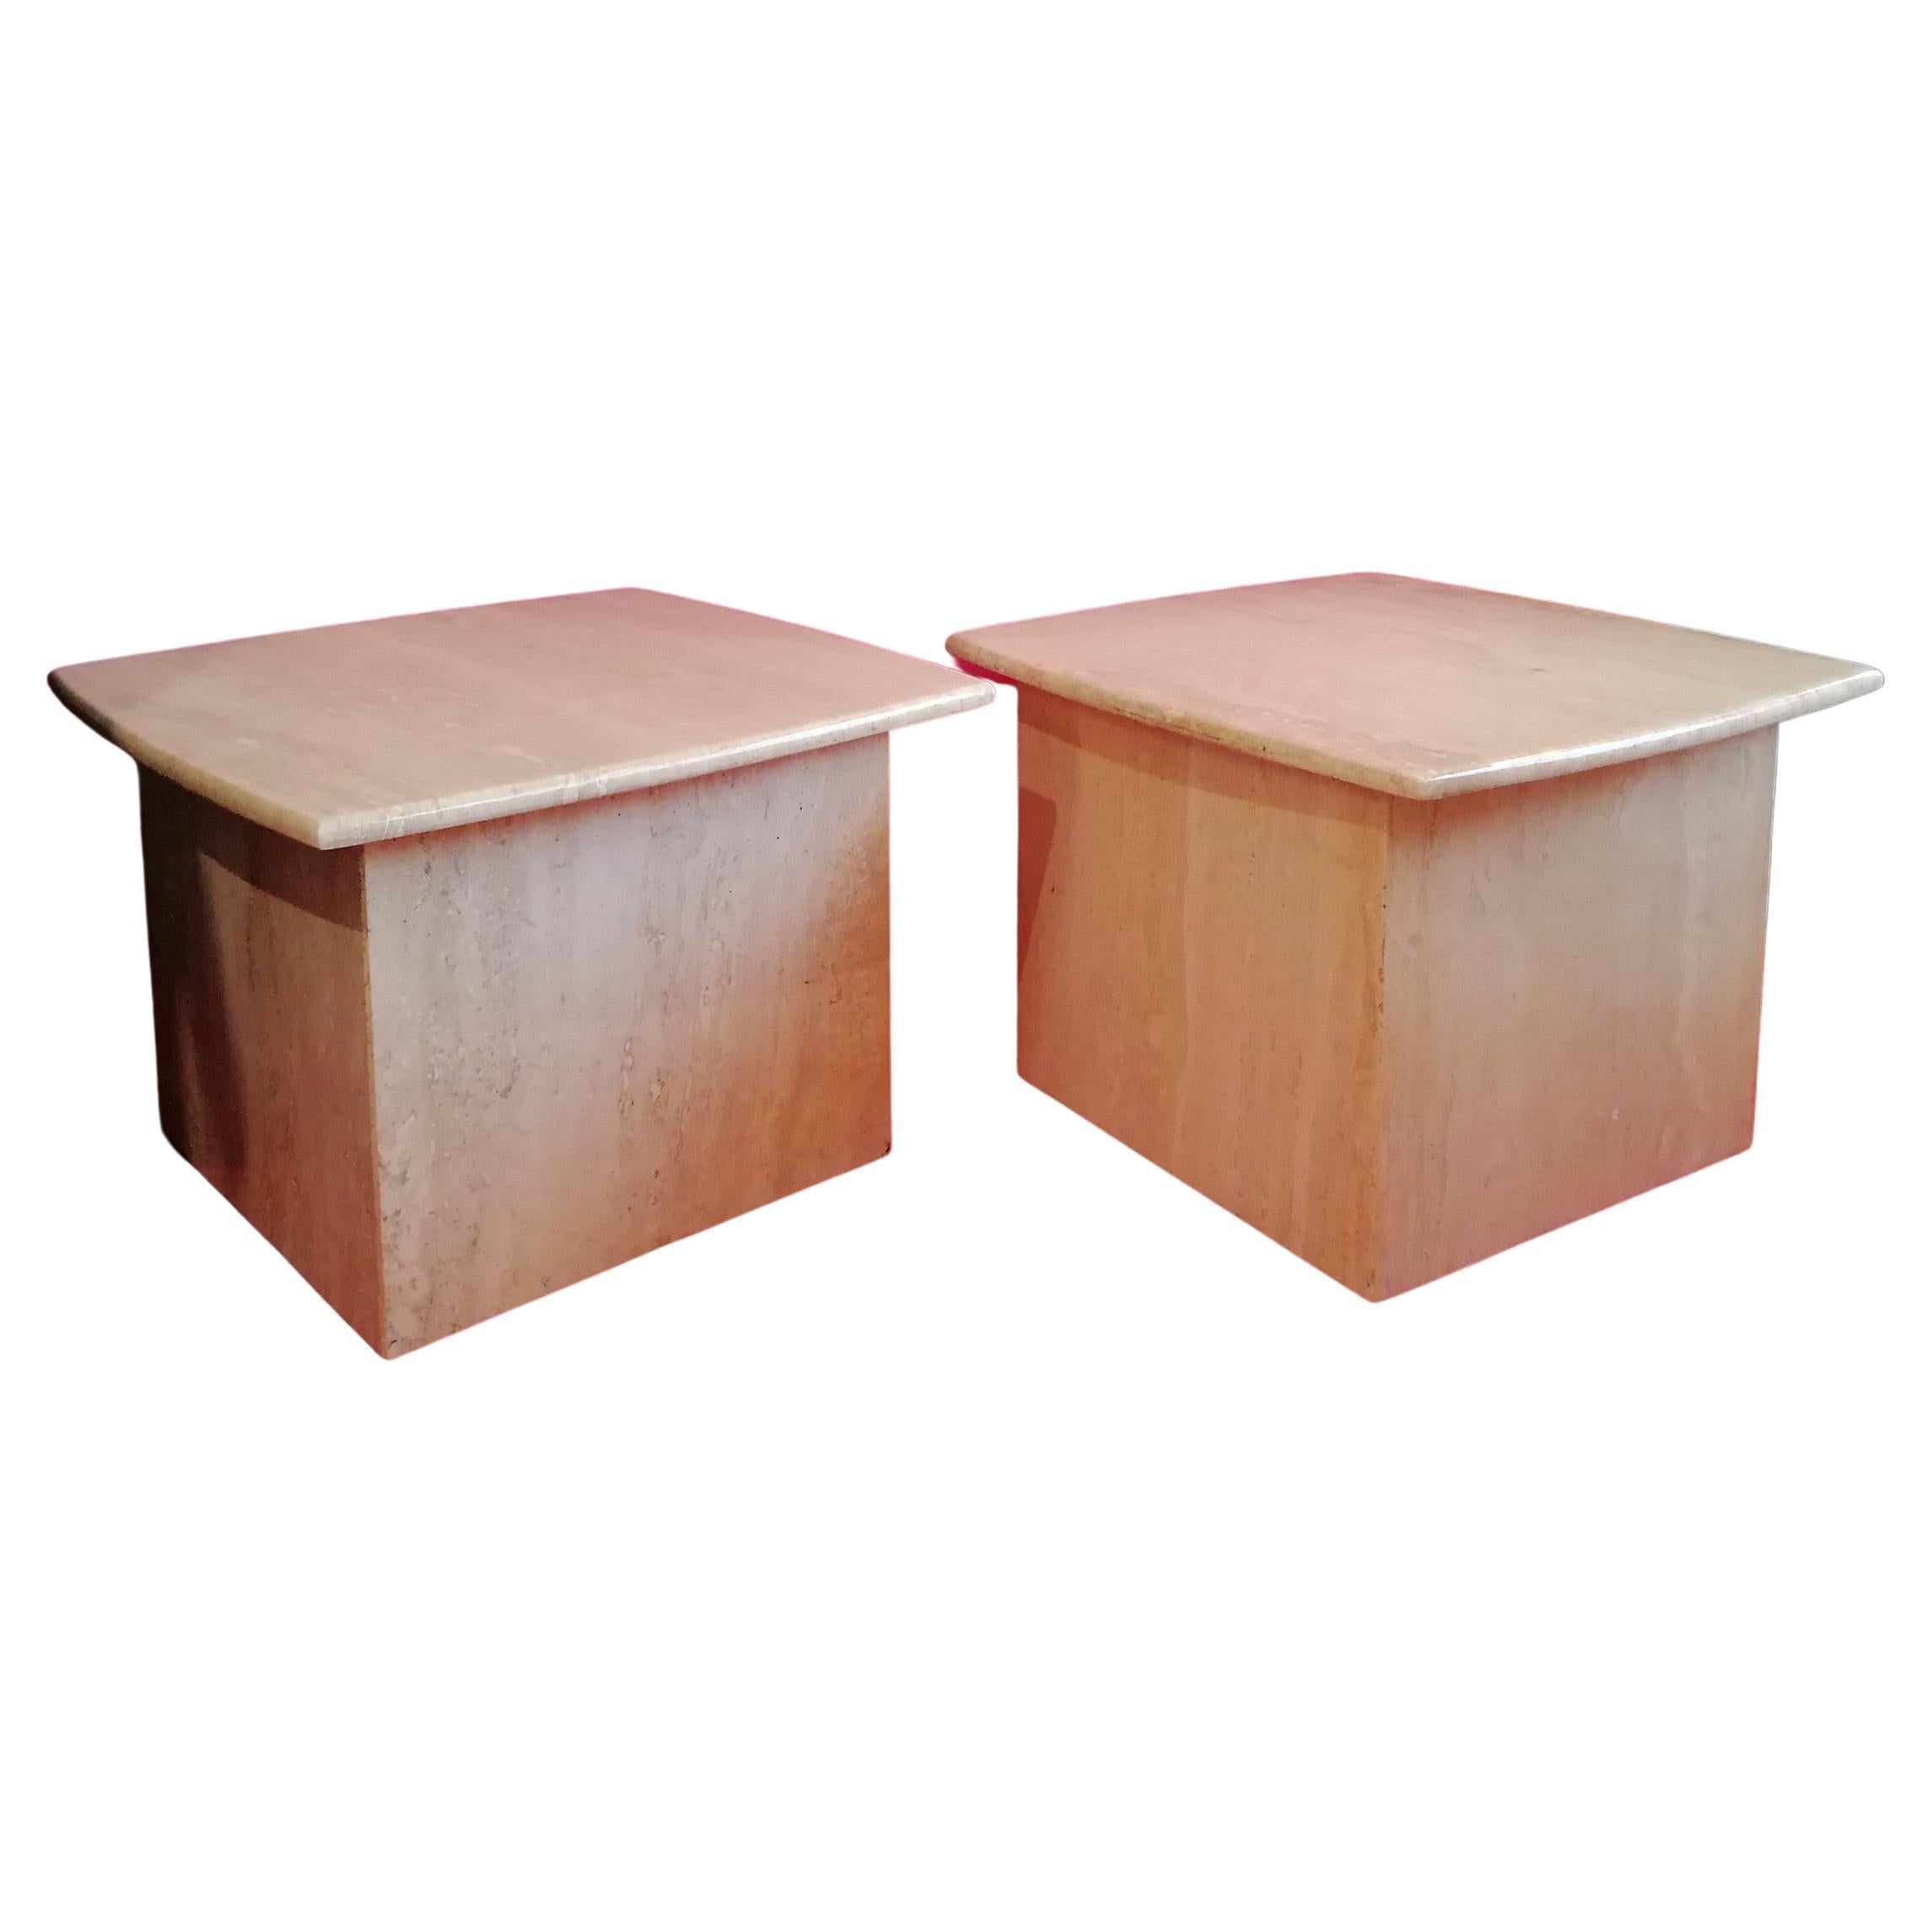 Simple and stylish postmodern polished travertine side or end tables, two available. Circa 1980s. The tops rest on the cube bases.

These will work in any interior setting.